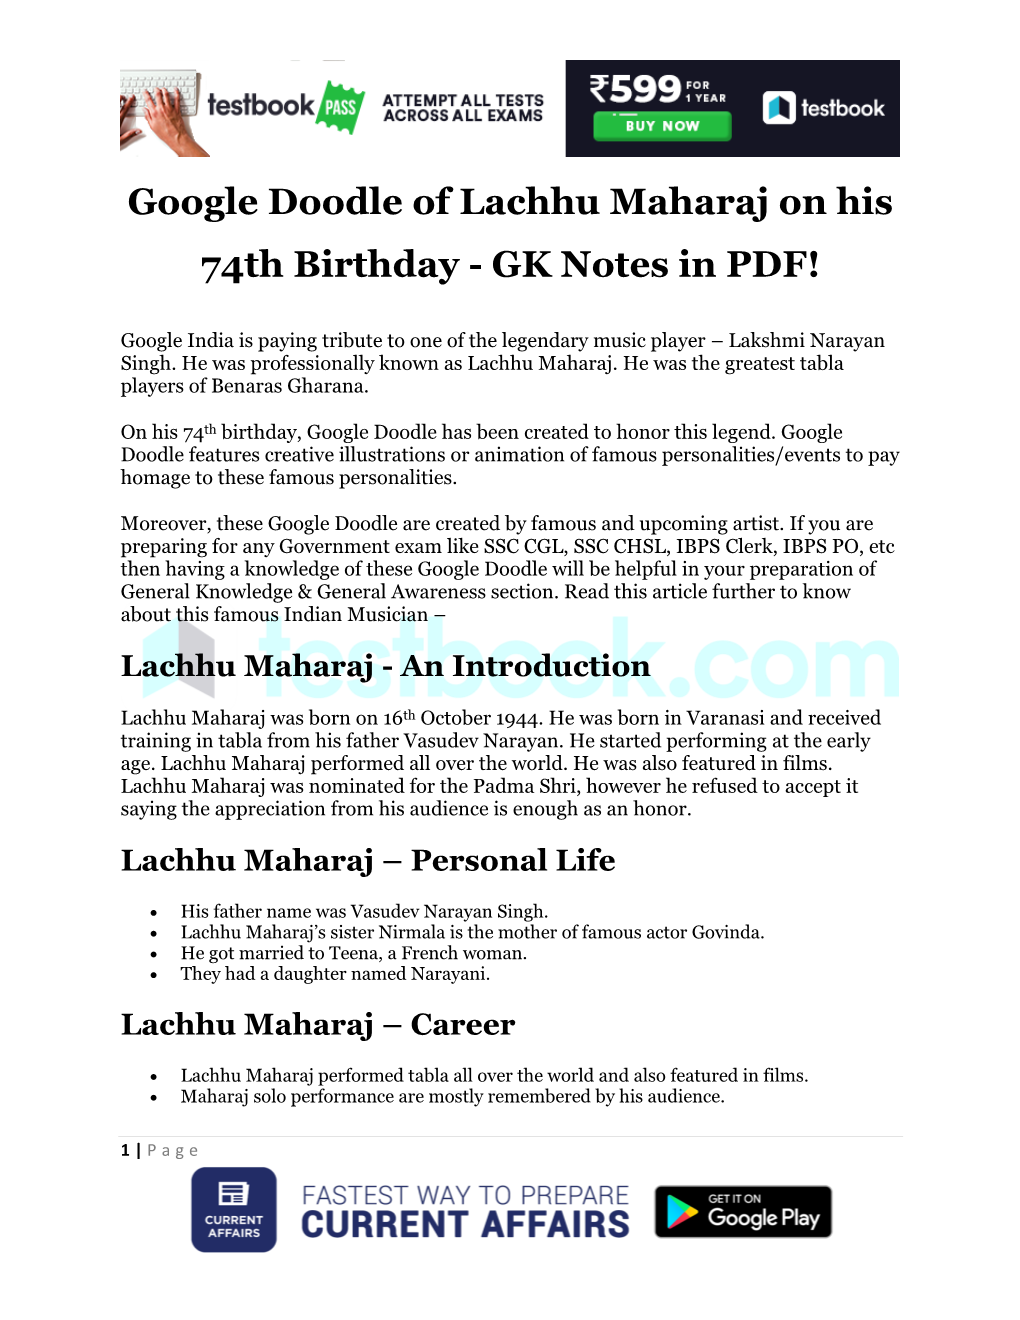 Google Doodle of Lachhu Maharaj on His 74Th Birthday - GK Notes in PDF!